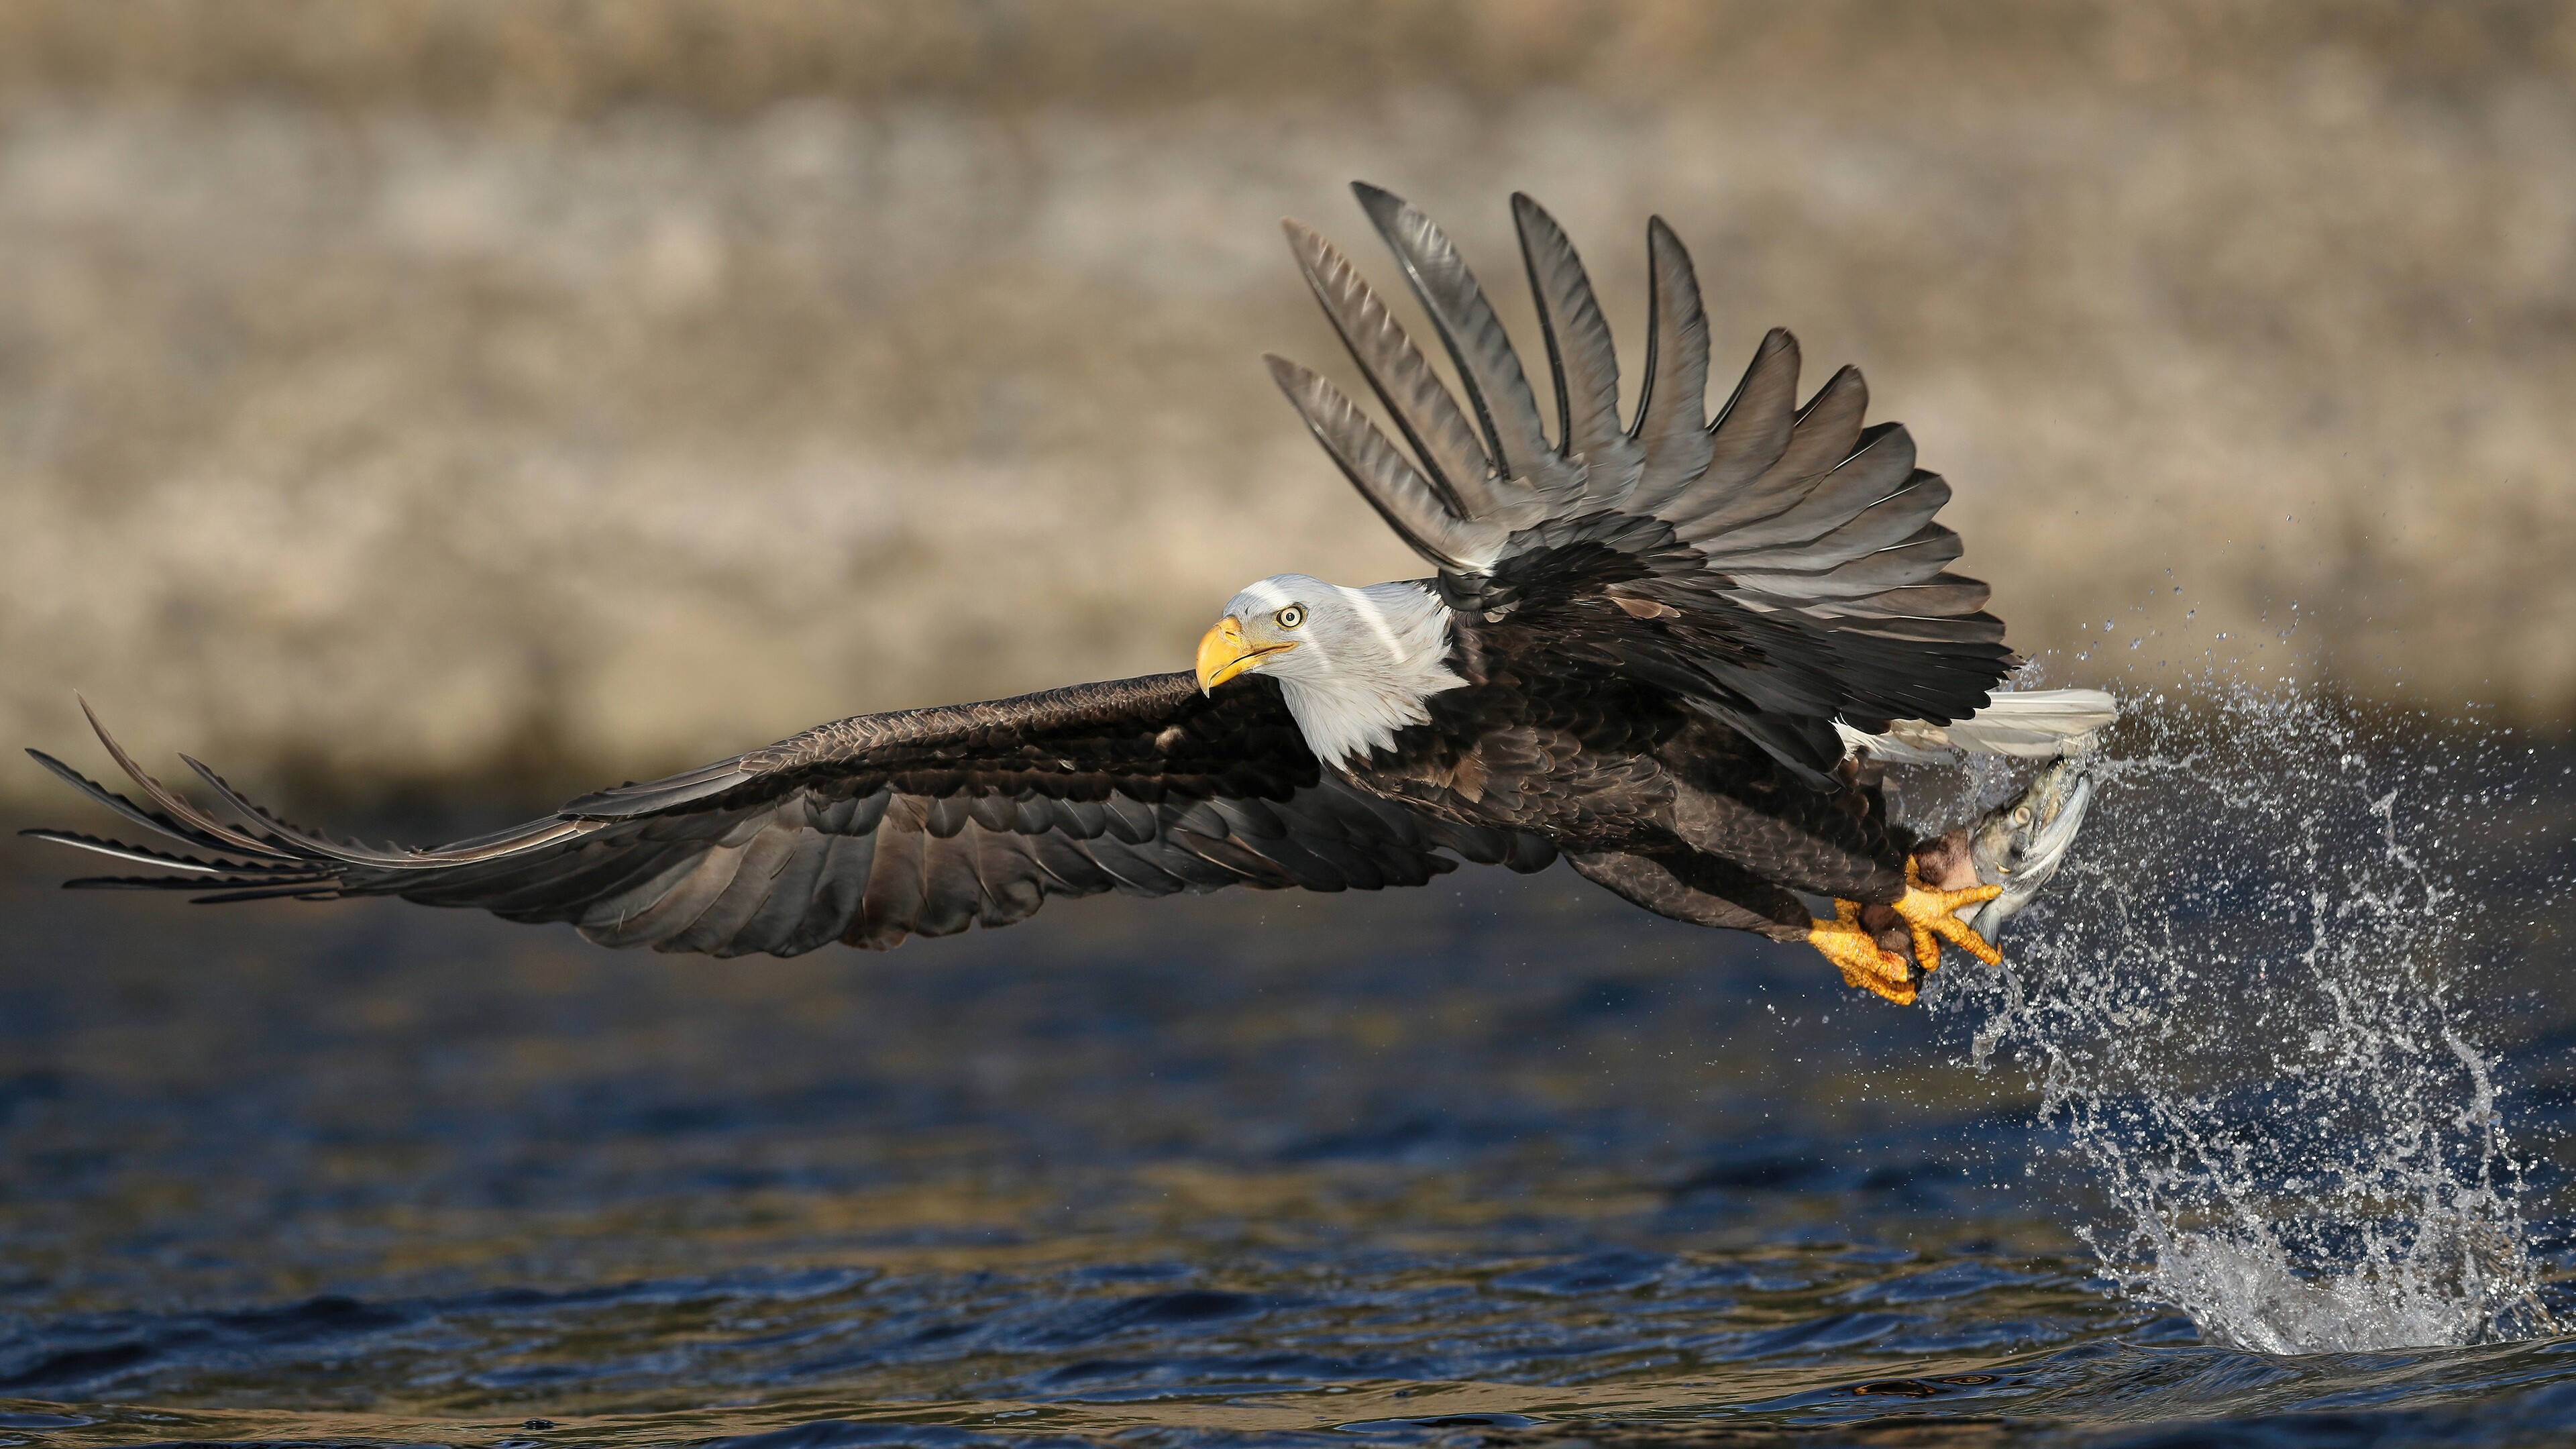 Eagle: Eagles fly during storms and glide from the wind's pressure. 3840x2160 4K Wallpaper.